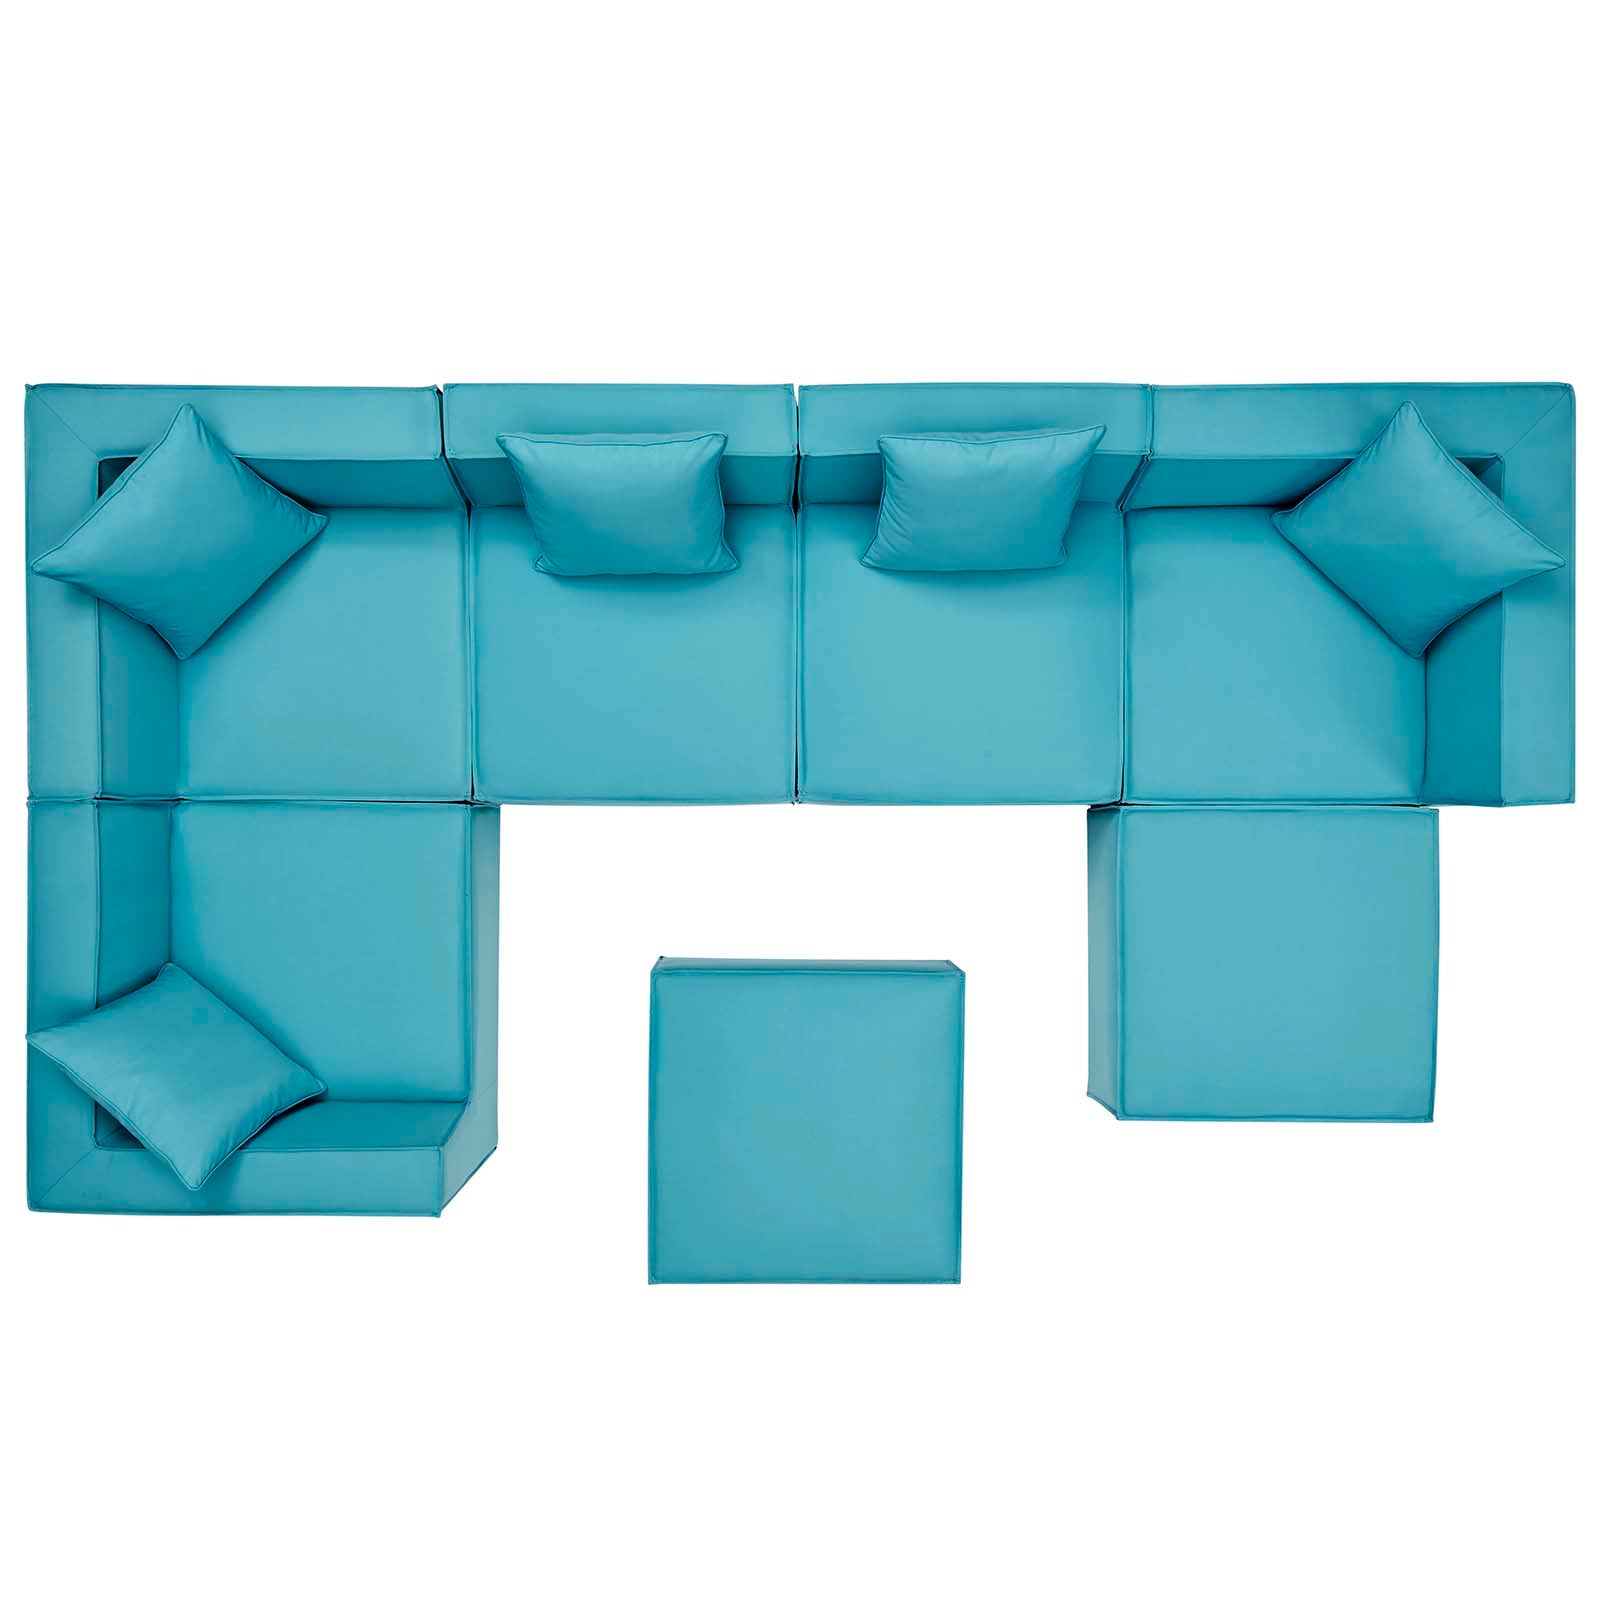 Saybrook Outdoor Patio Upholstered 7-Piece Sectional Sofa - East Shore Modern Home Furnishings